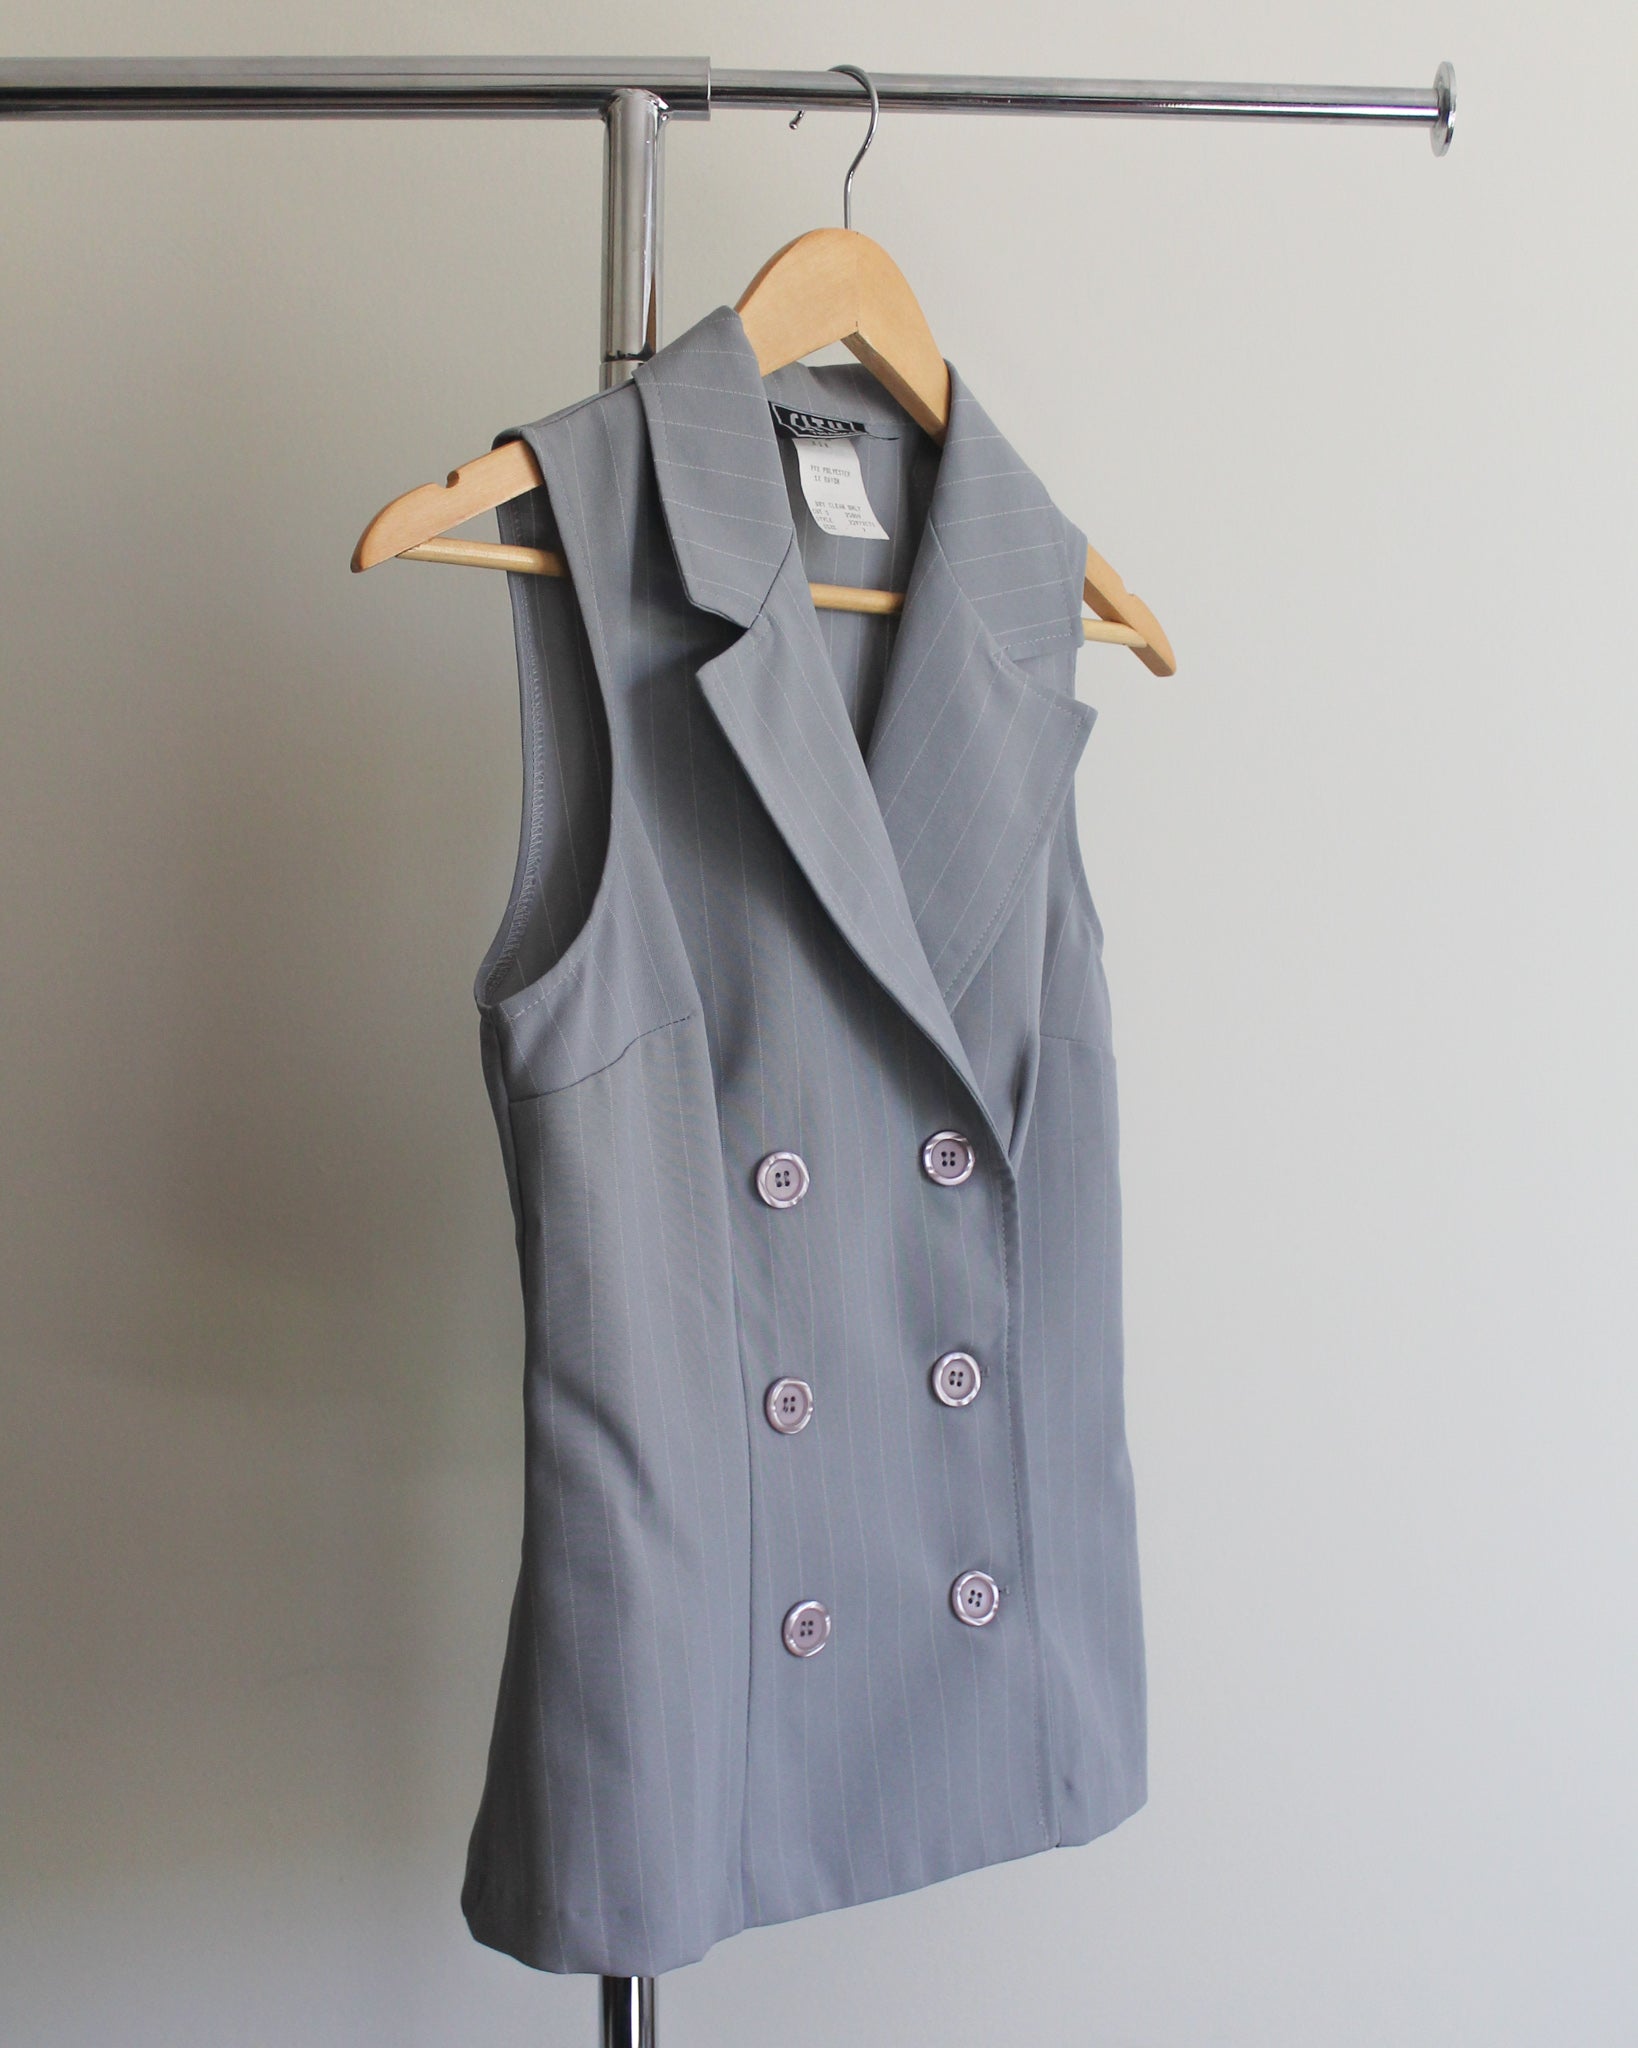 90s Pastel Blue Pinstripe Double Breasted Vest (Fits XS/S)